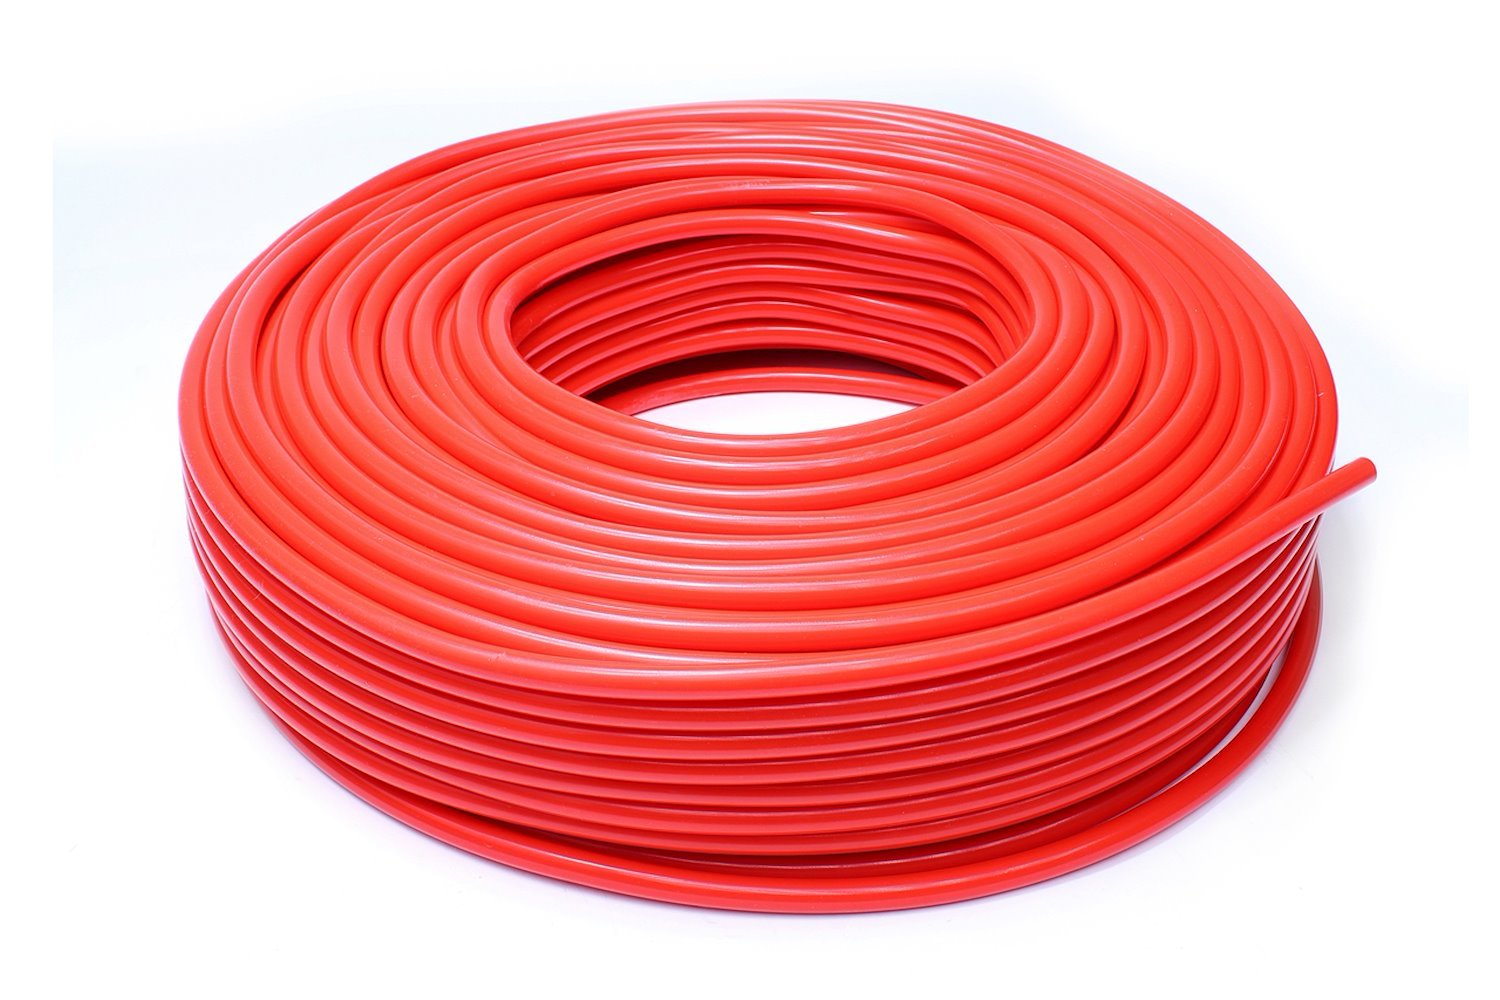 HTSVH10-REDx100 High-Temperature Silicone Vacuum Hose Tubing, 10 mm ID, 100 ft. Roll, Red